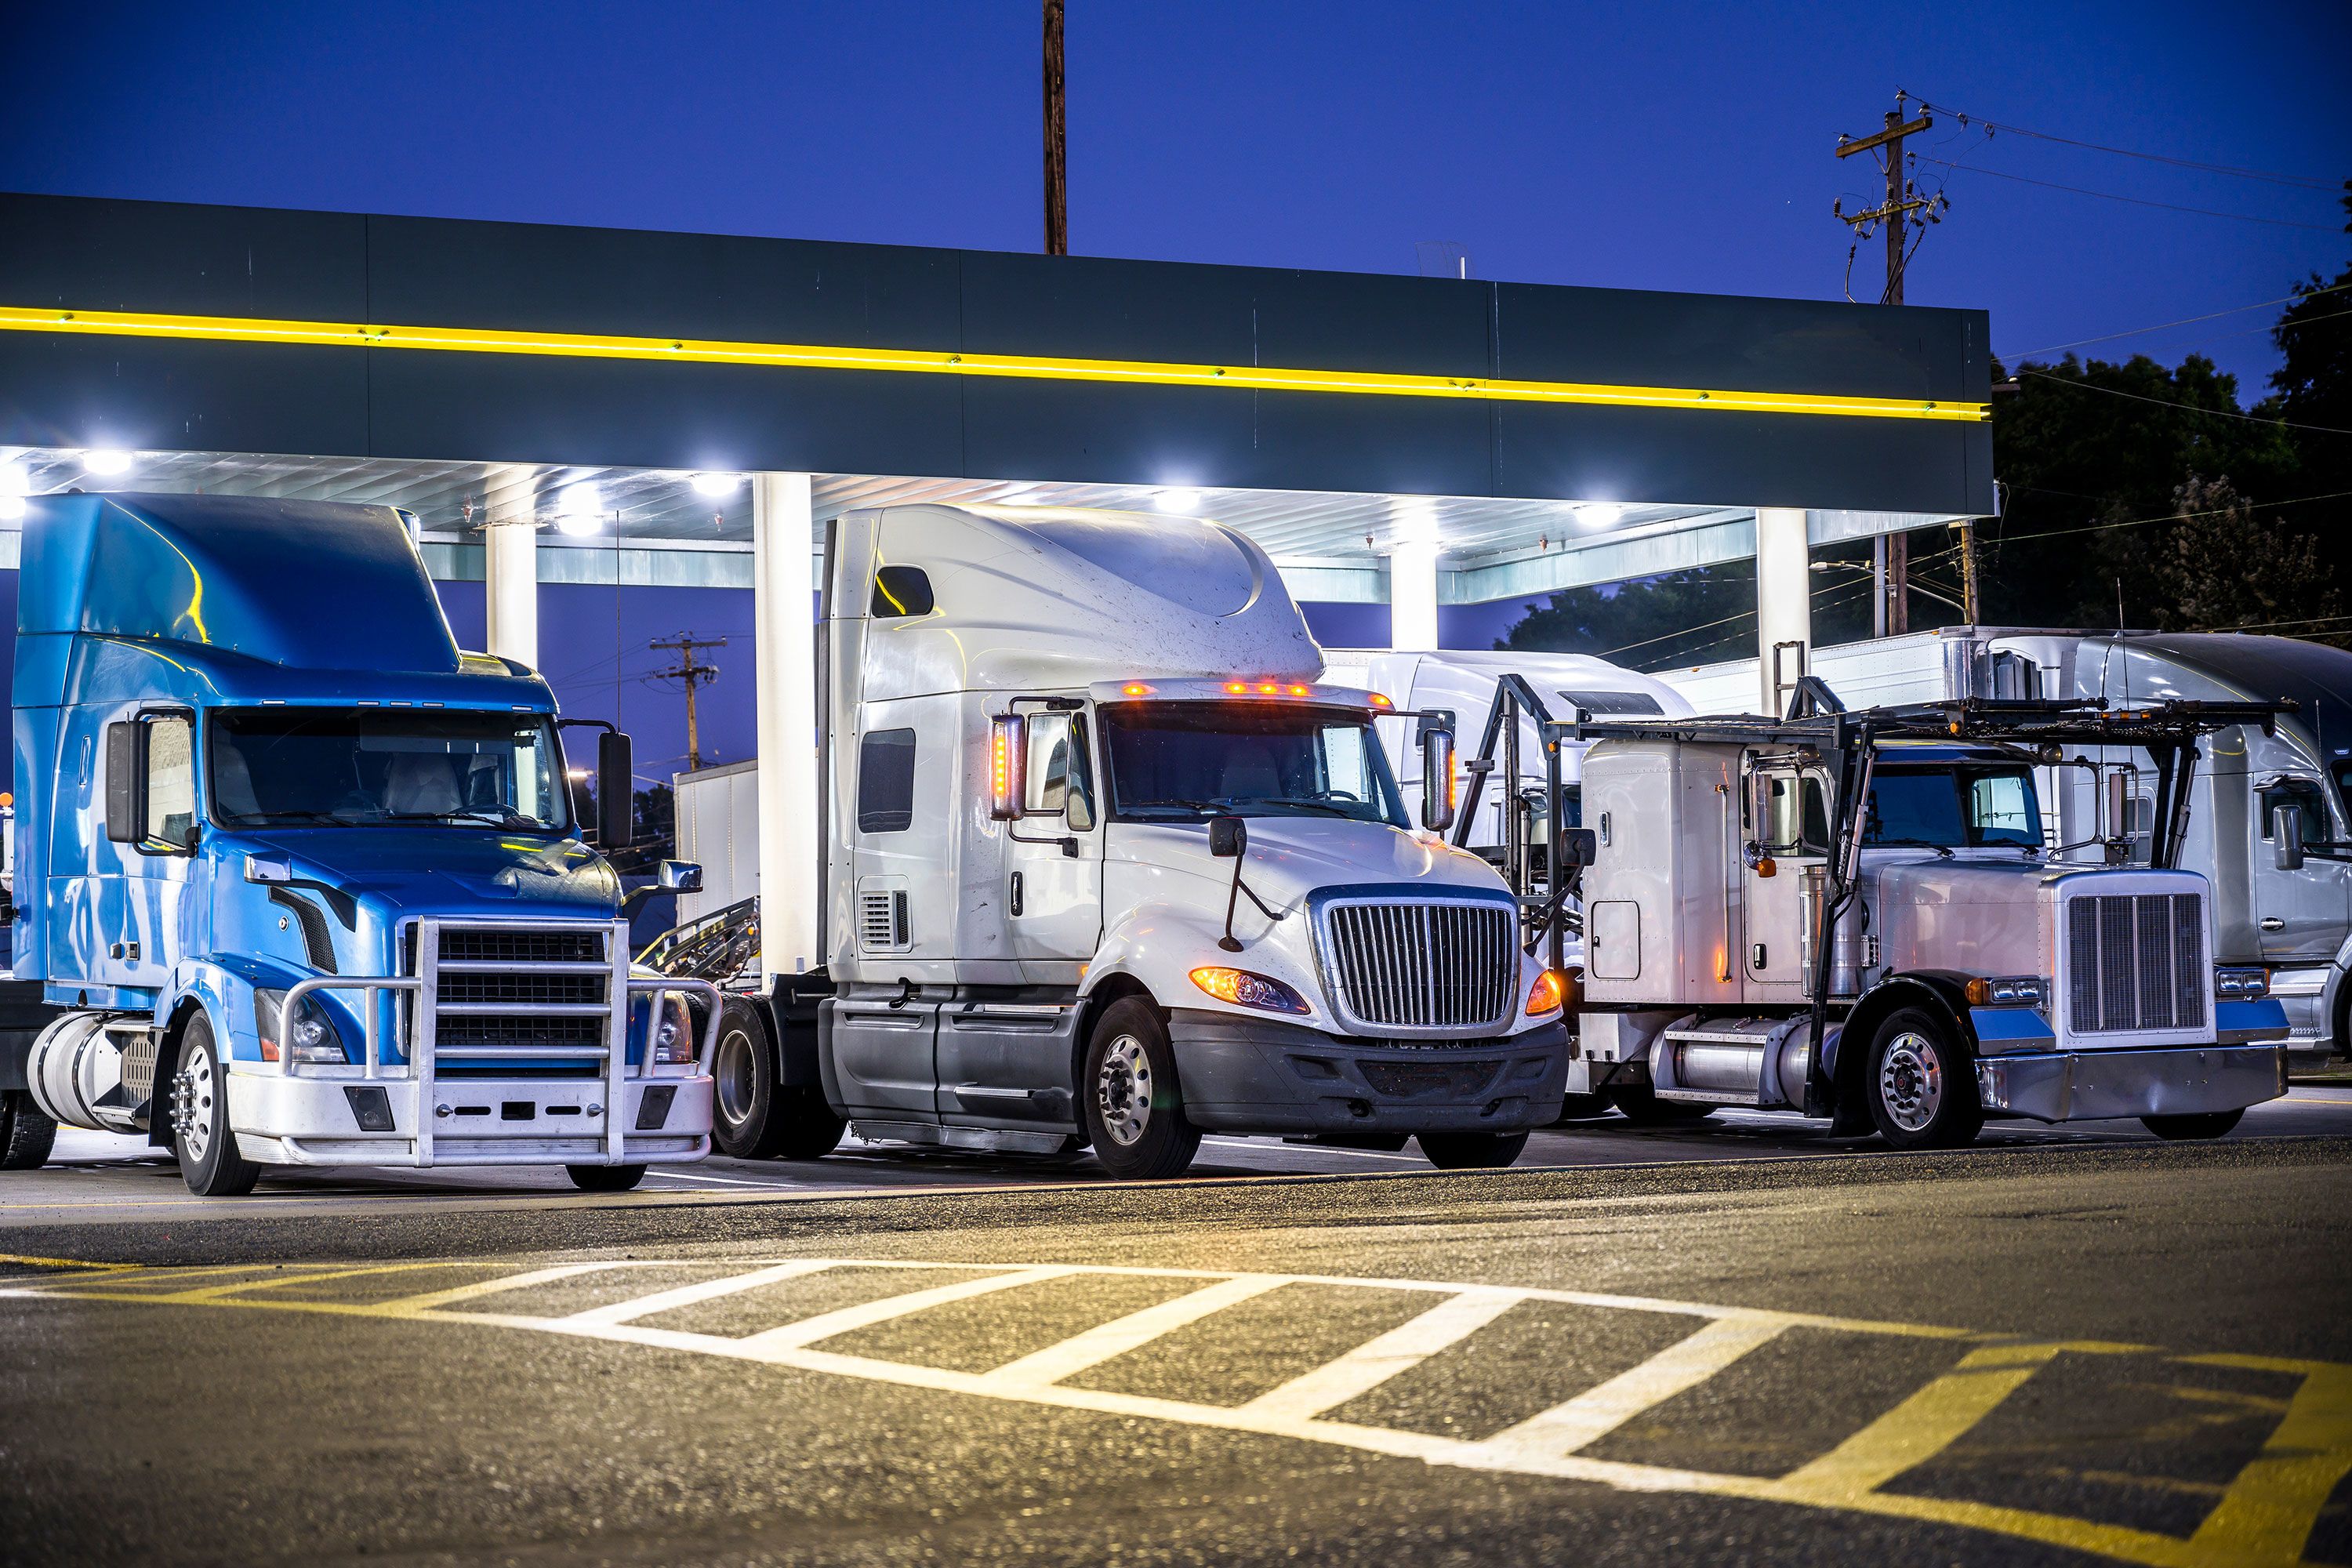 Truck-stop chains take a cautious approach amid Covid-19 crisis - Truck News